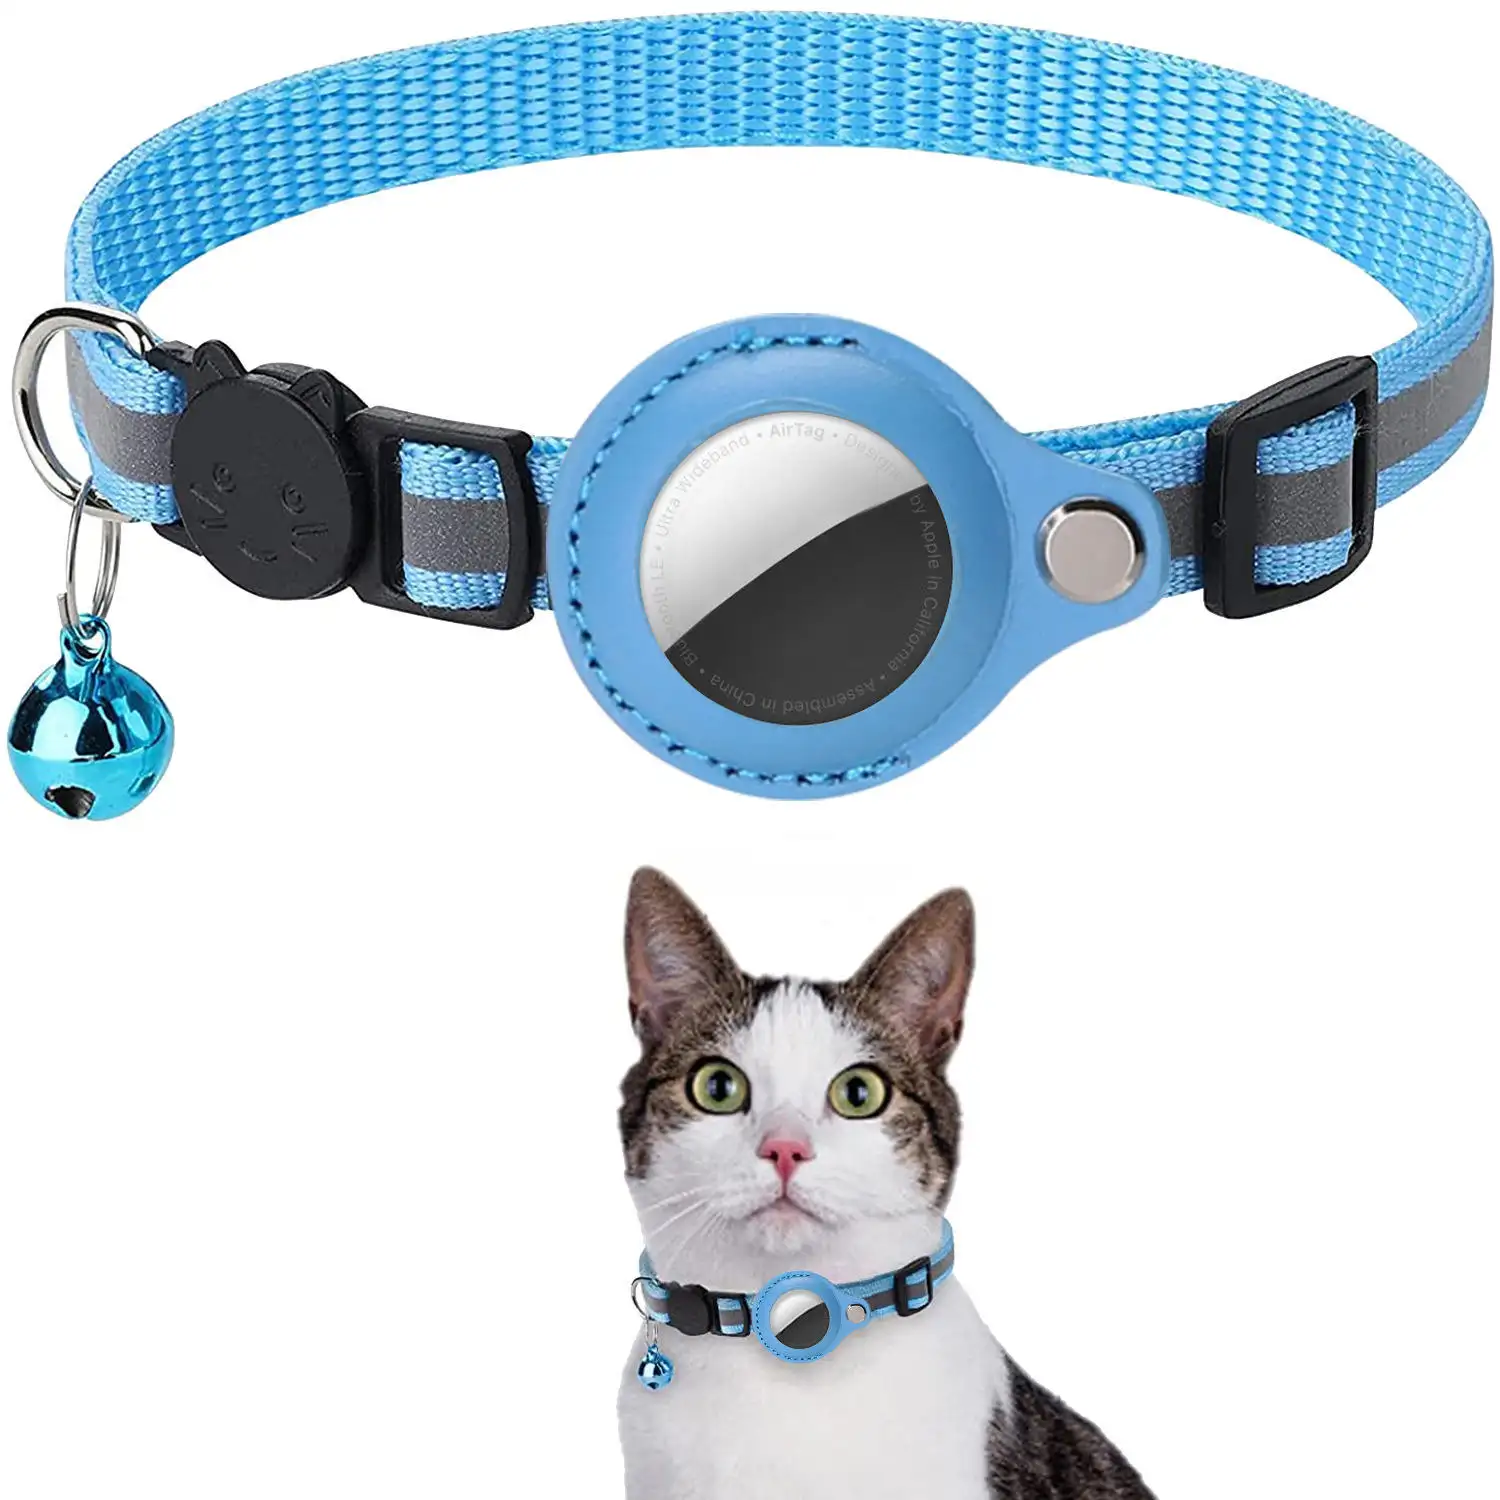 Custom Reflective Adjustable Collar with GPS Tracker for Heavy Duty Training Personalized Nylon Pet Collar